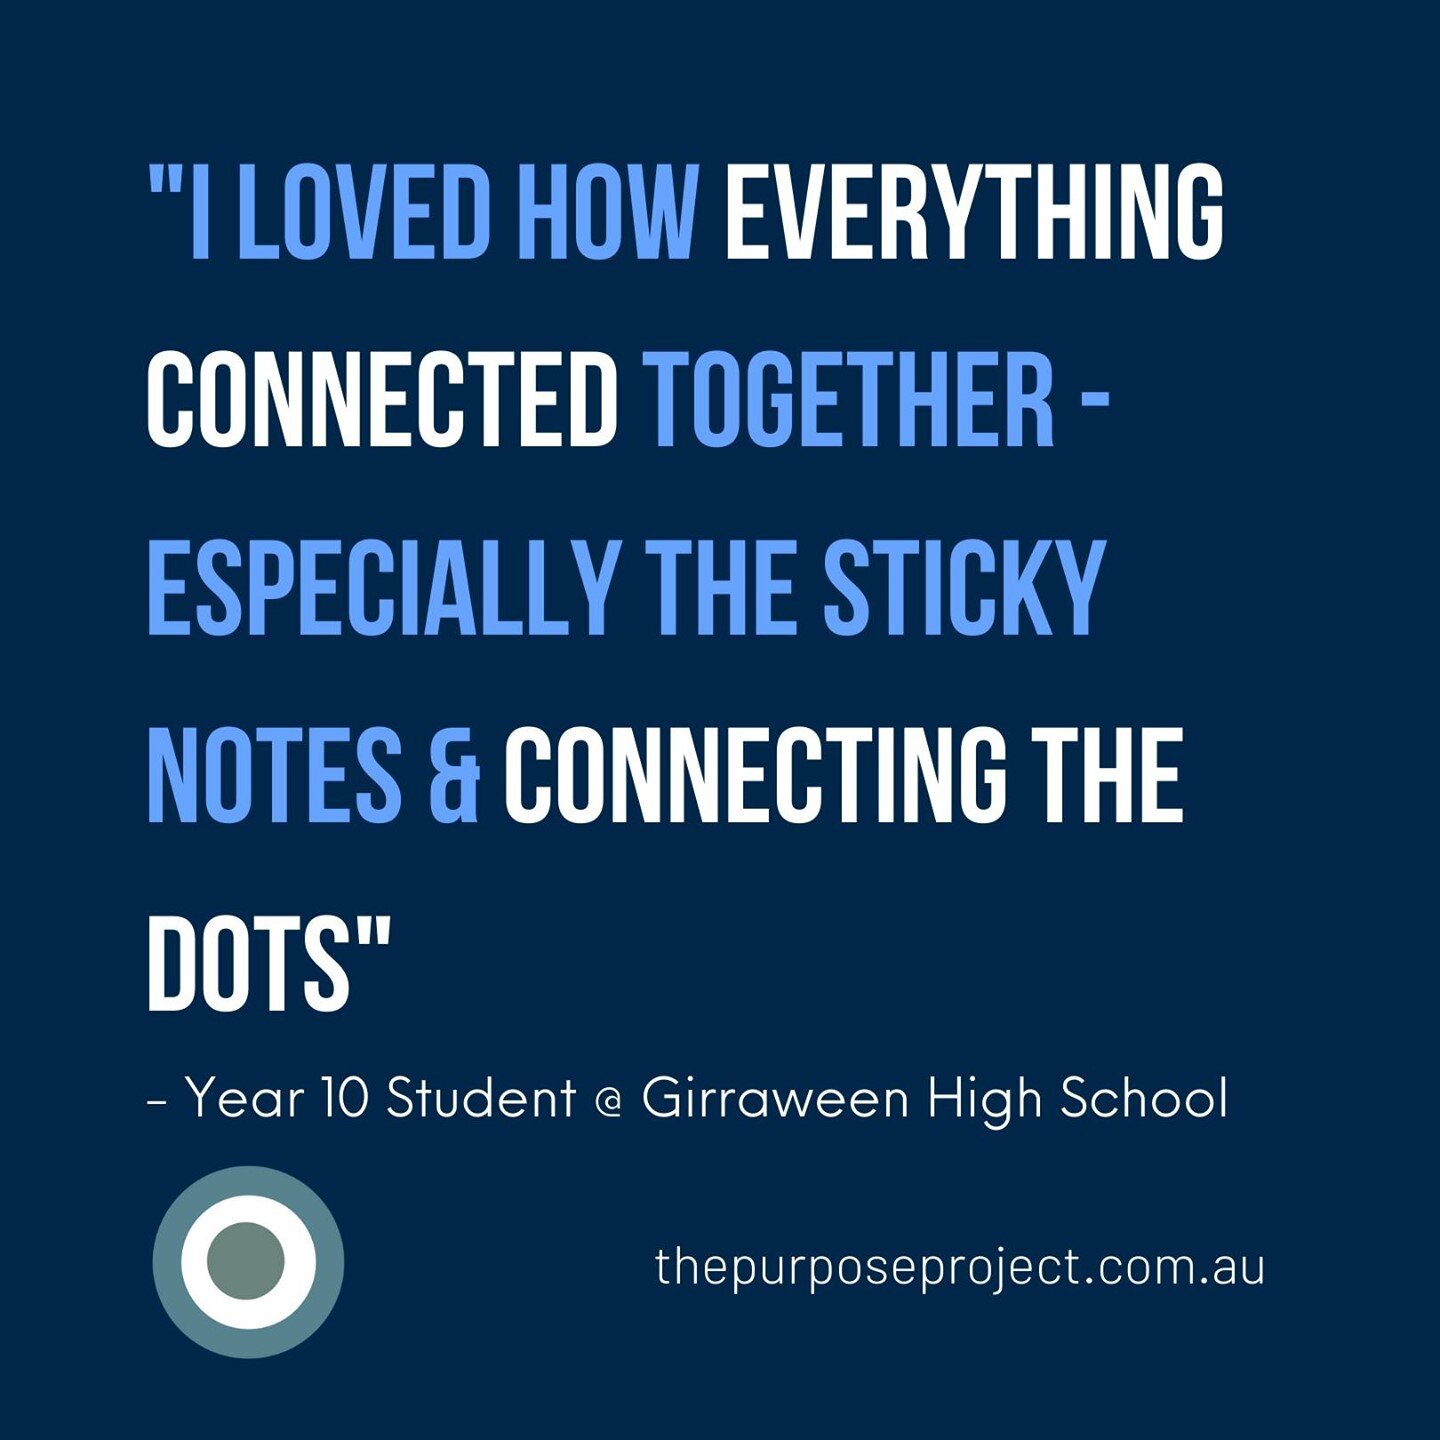 Our Life Design Course at Girraween High School.⁠
⁠
It can be hard to connect the dots of your mind when you don't have the right questions and system to follow to understand.⁠
⁠
Can you imagine if all youths were able to have a way to connect the do